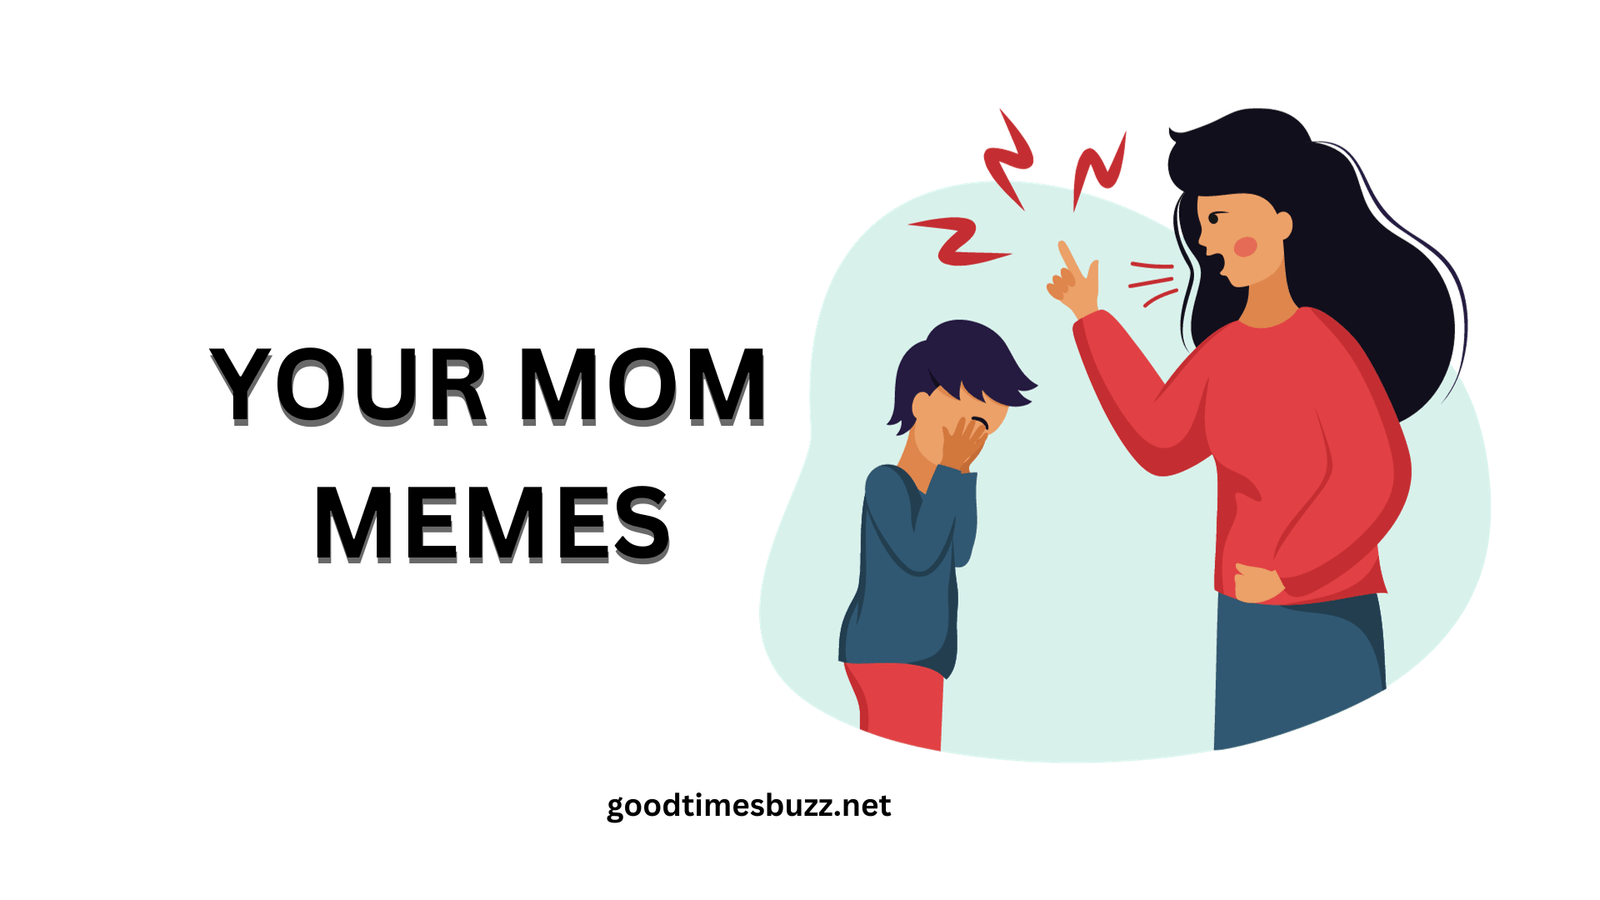 Your Mom Memes